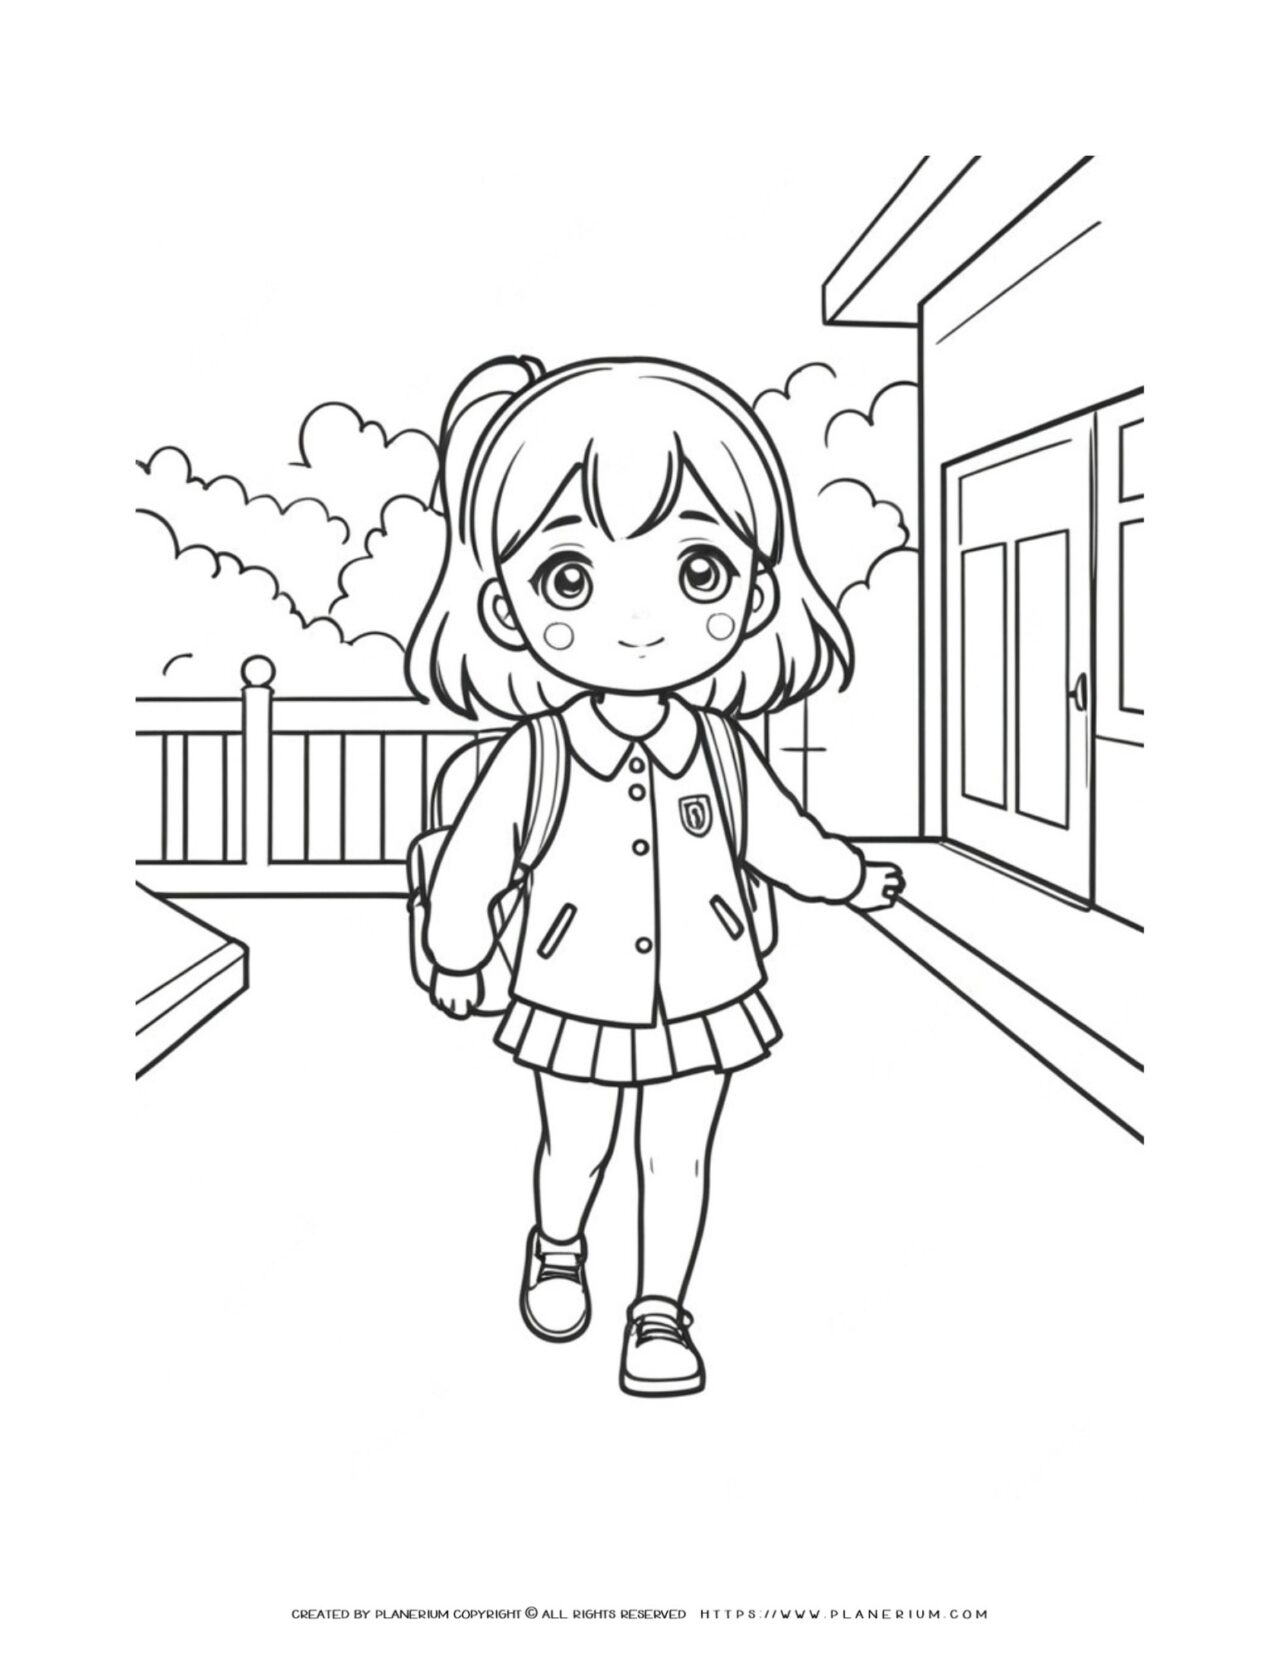 little-girl-going-to-school-back-to-school-coloring-page-for-kids